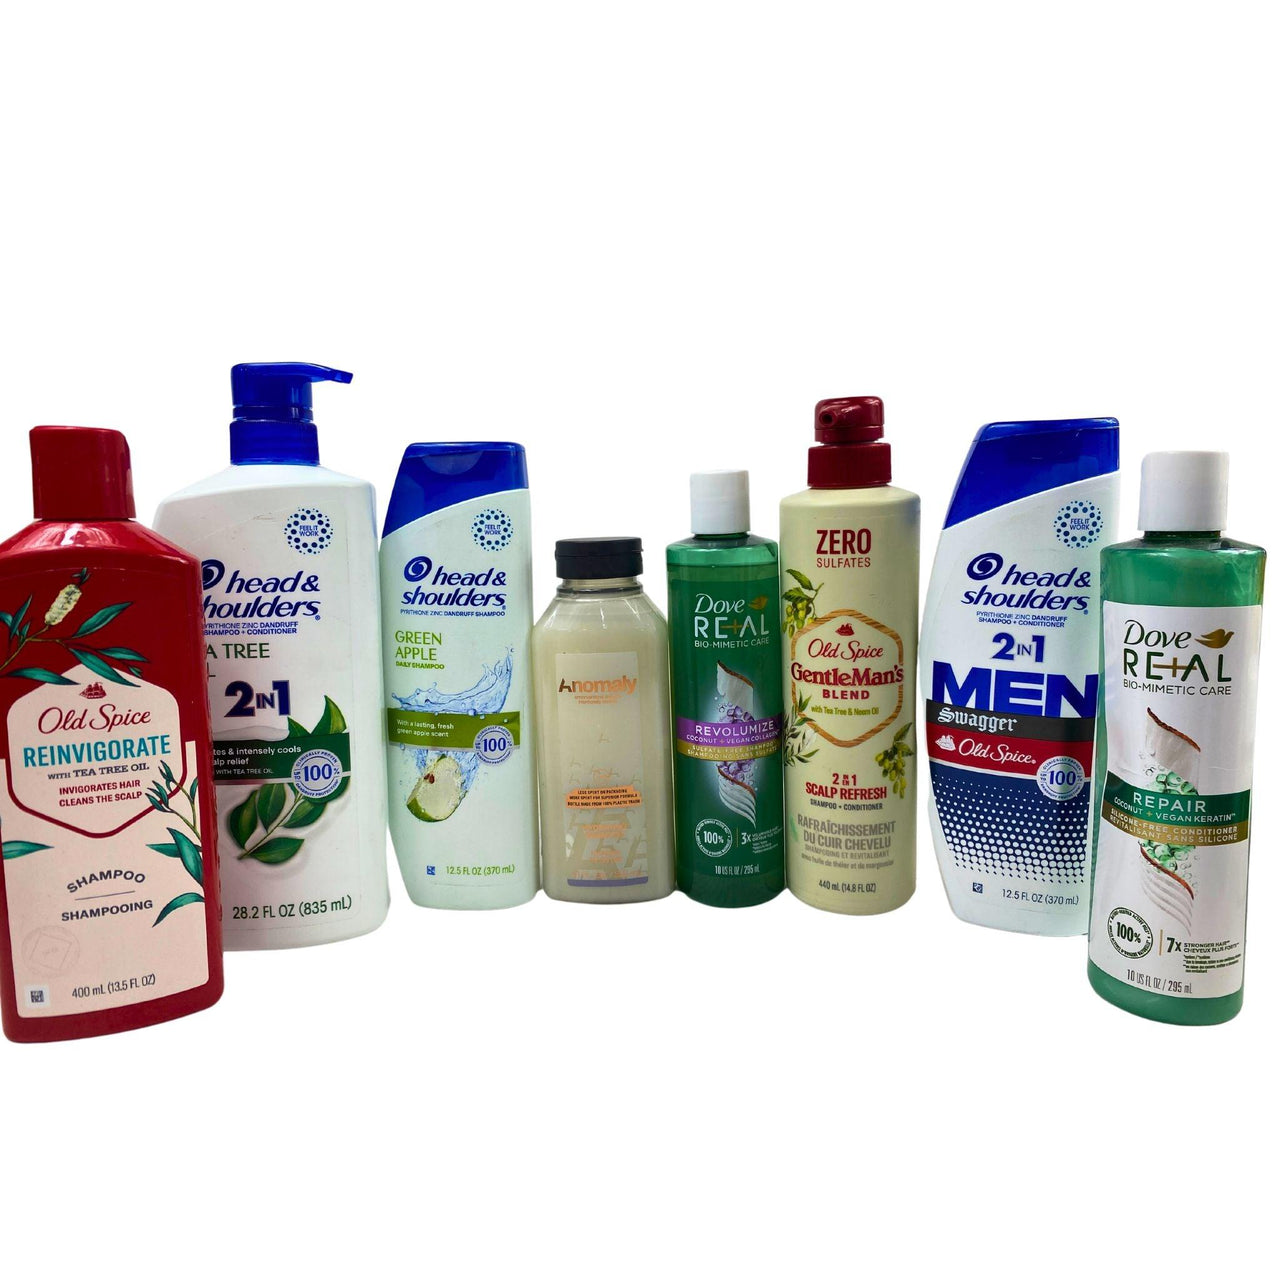 Shampoo & Conditioner Mix Brands Like Head & Shoulders,Old Spice,Dove (55 Pcs Lot) - Discount Wholesalers Inc